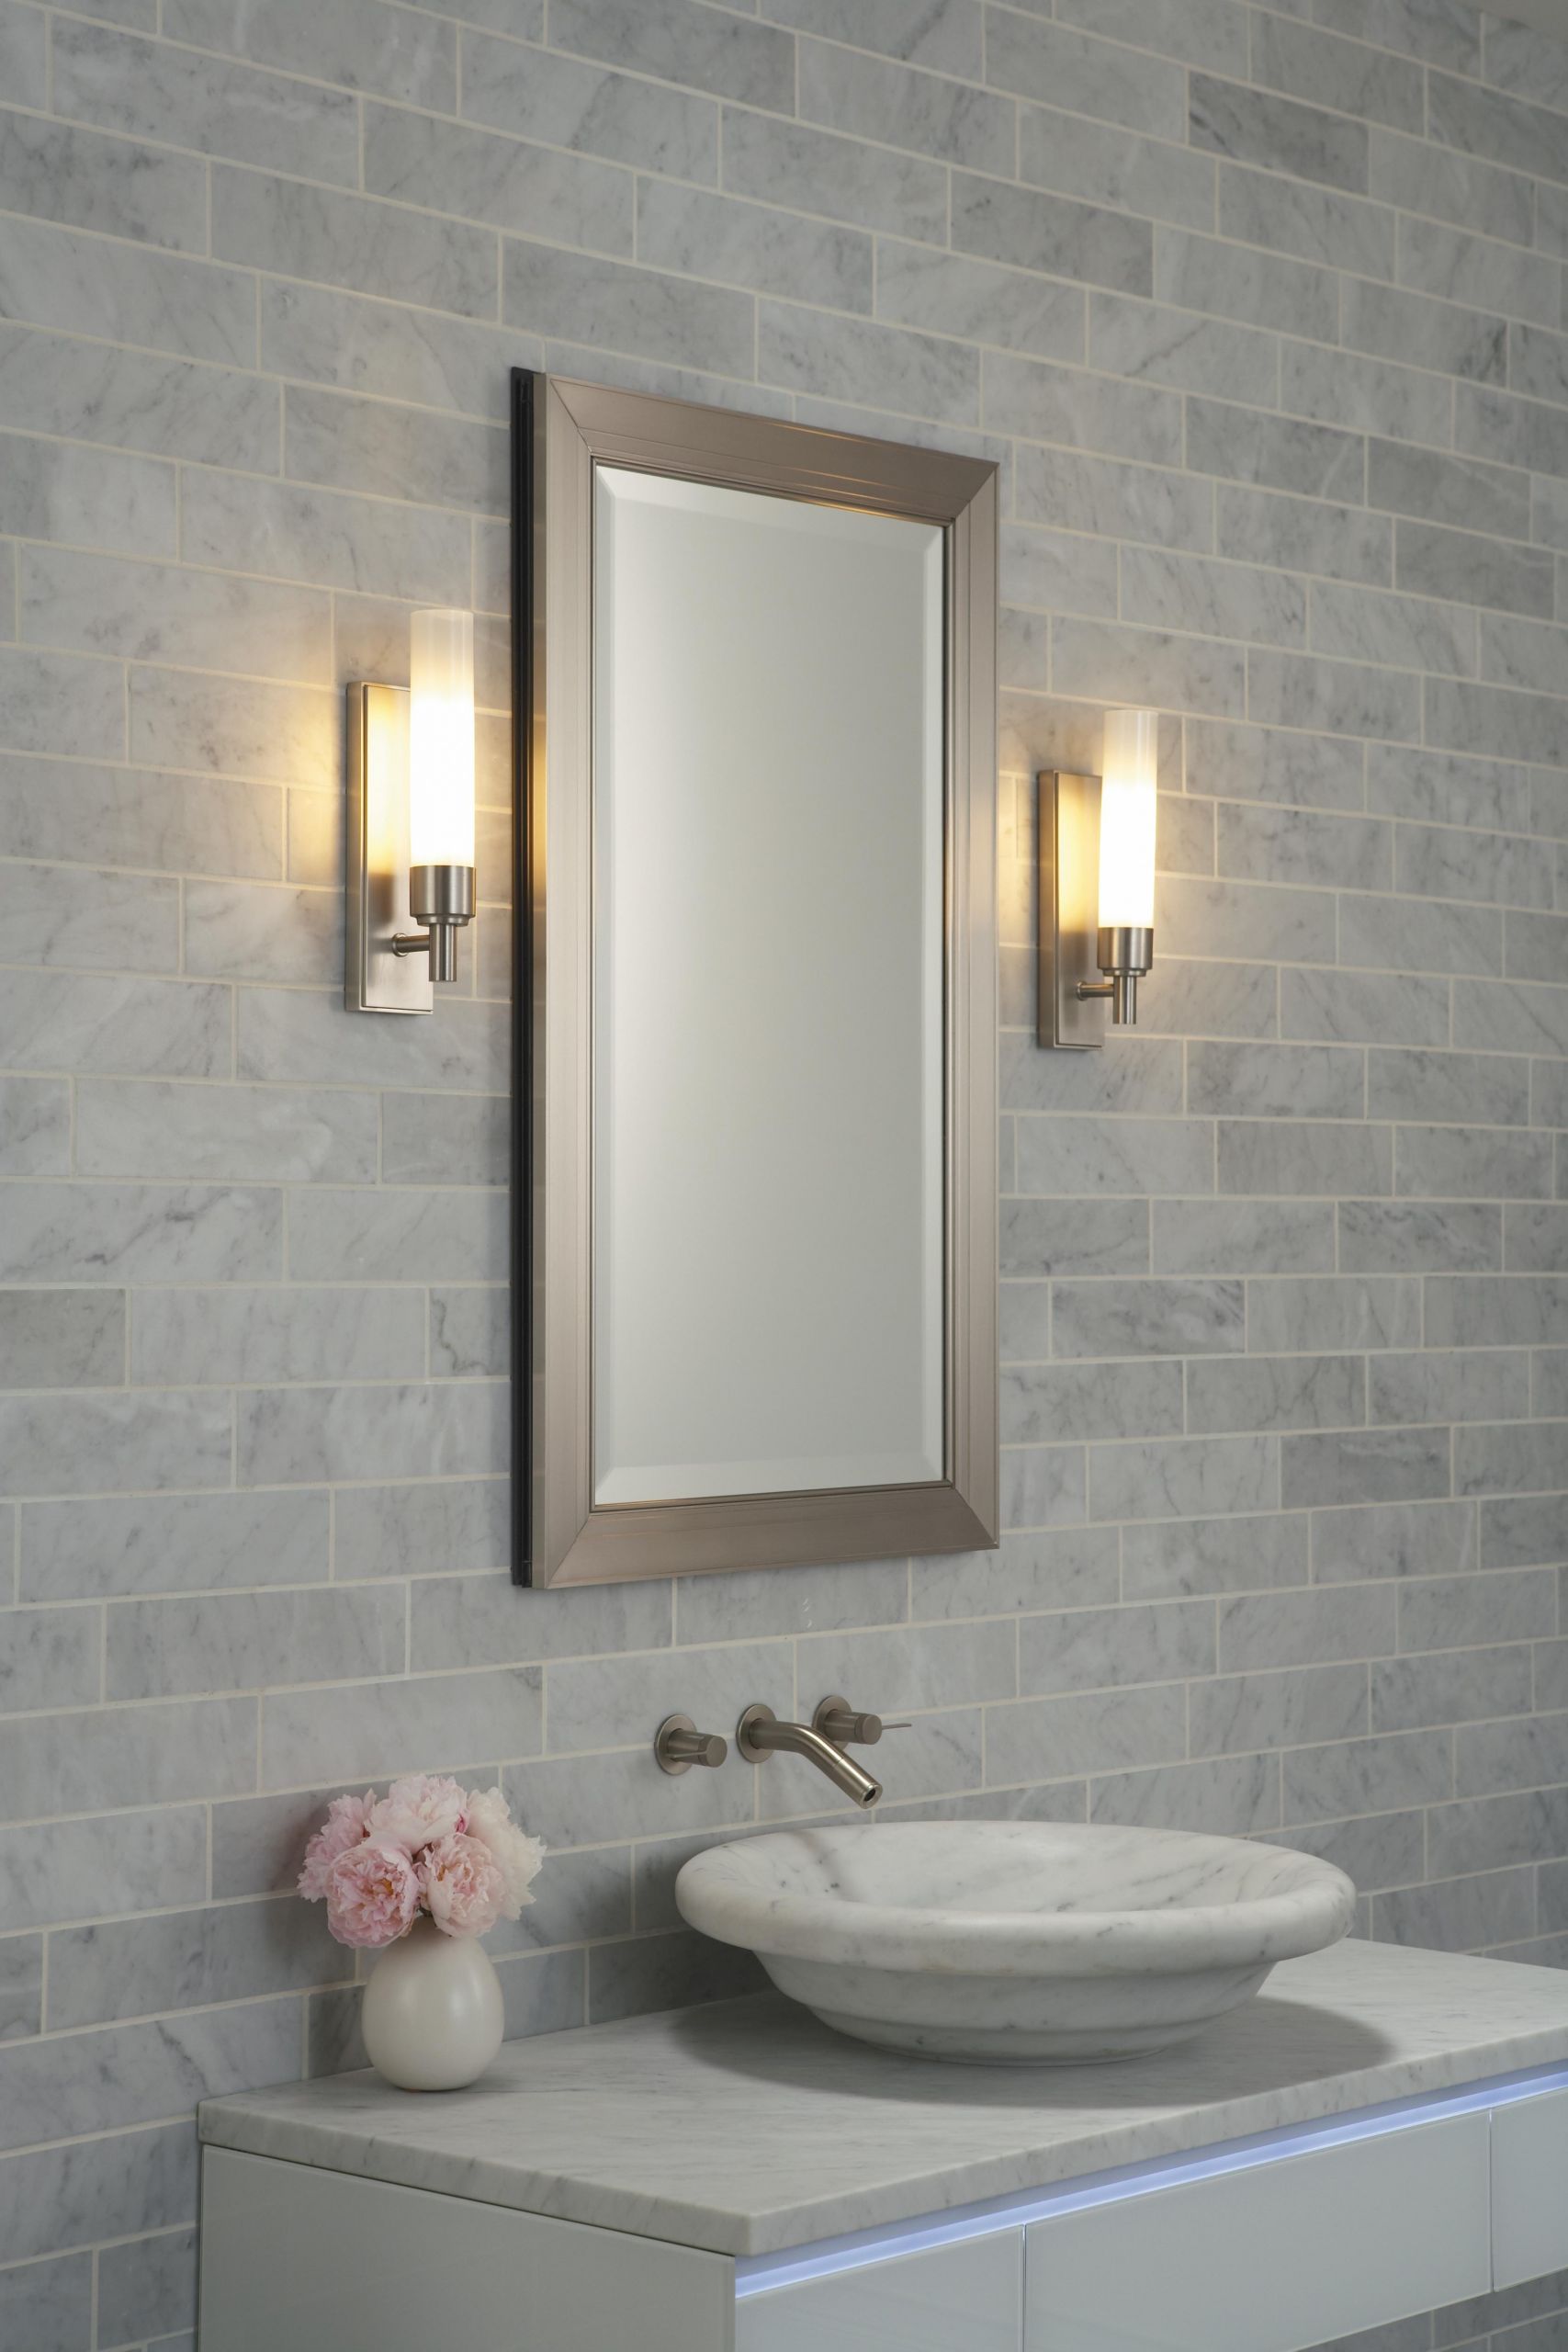 Vanity Wall Mirrors For Bathroom
 20 Best Collection of Fancy Bathroom Wall Mirrors